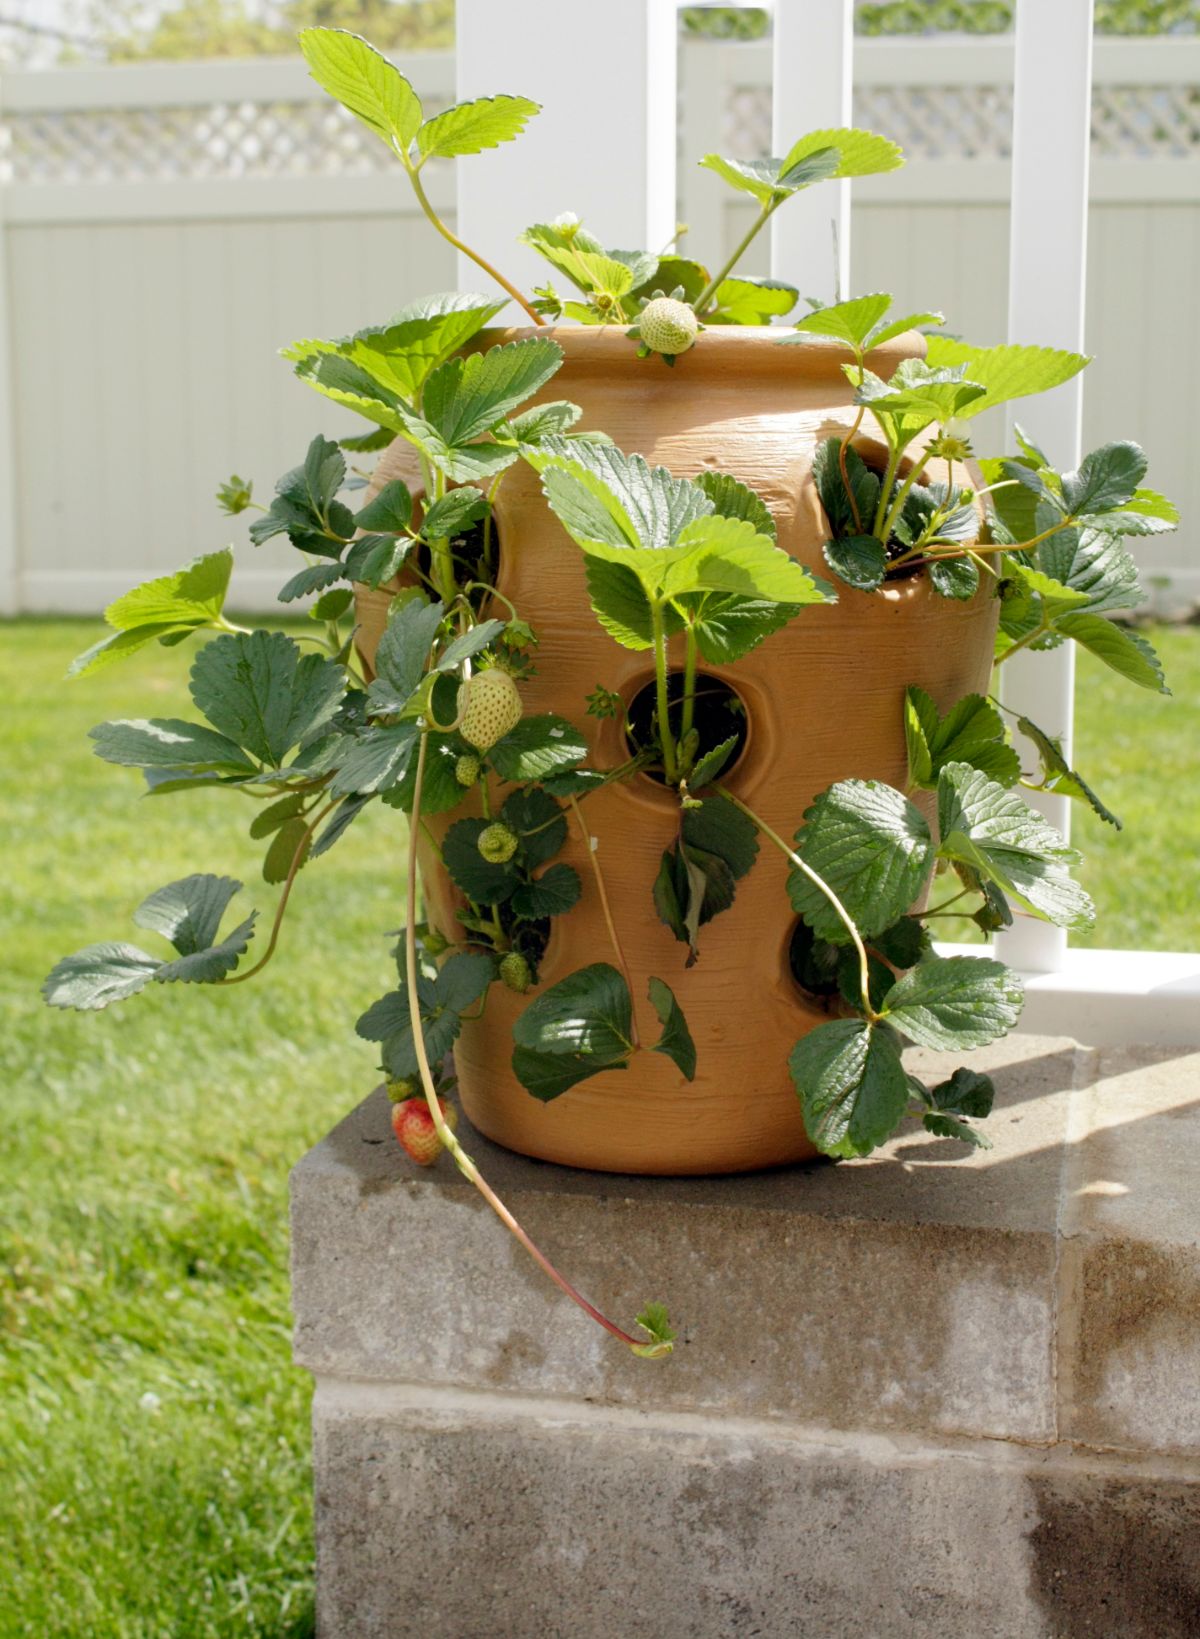 Details about   TOPSY TURVY UPSIDE DOWN STRAWBERRY PLANTER NEW 